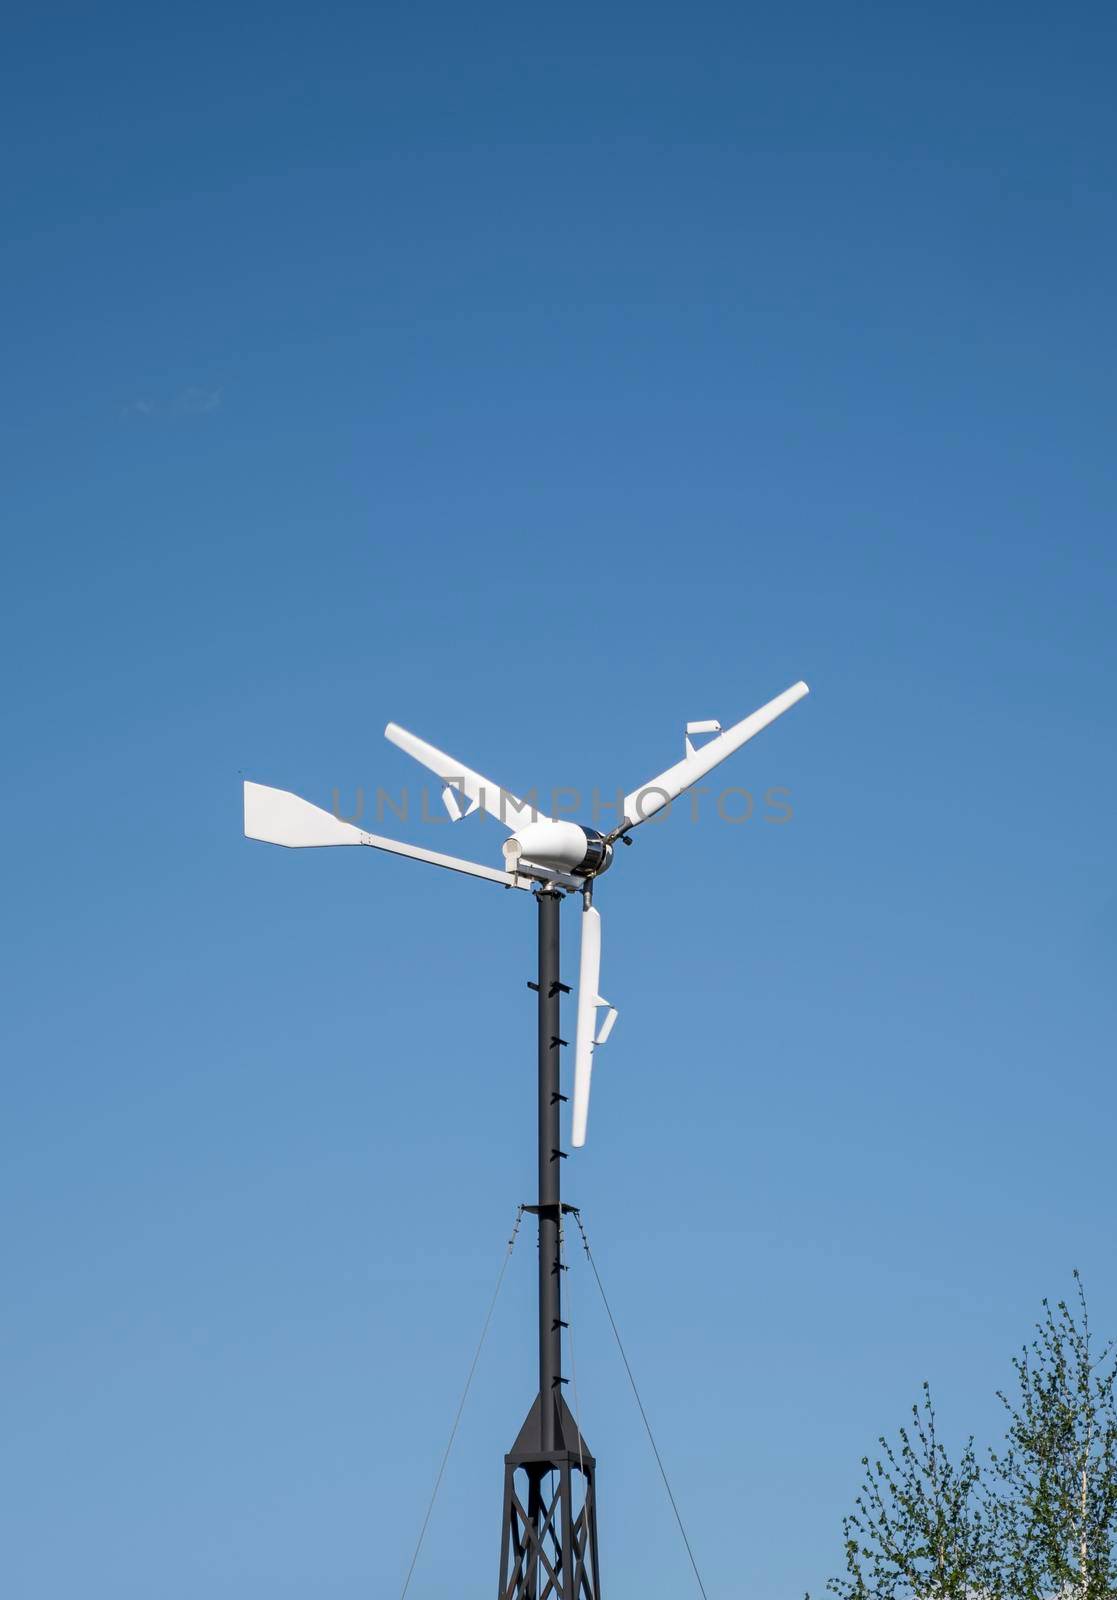 Windmill for renewable electric energy production in a private sector